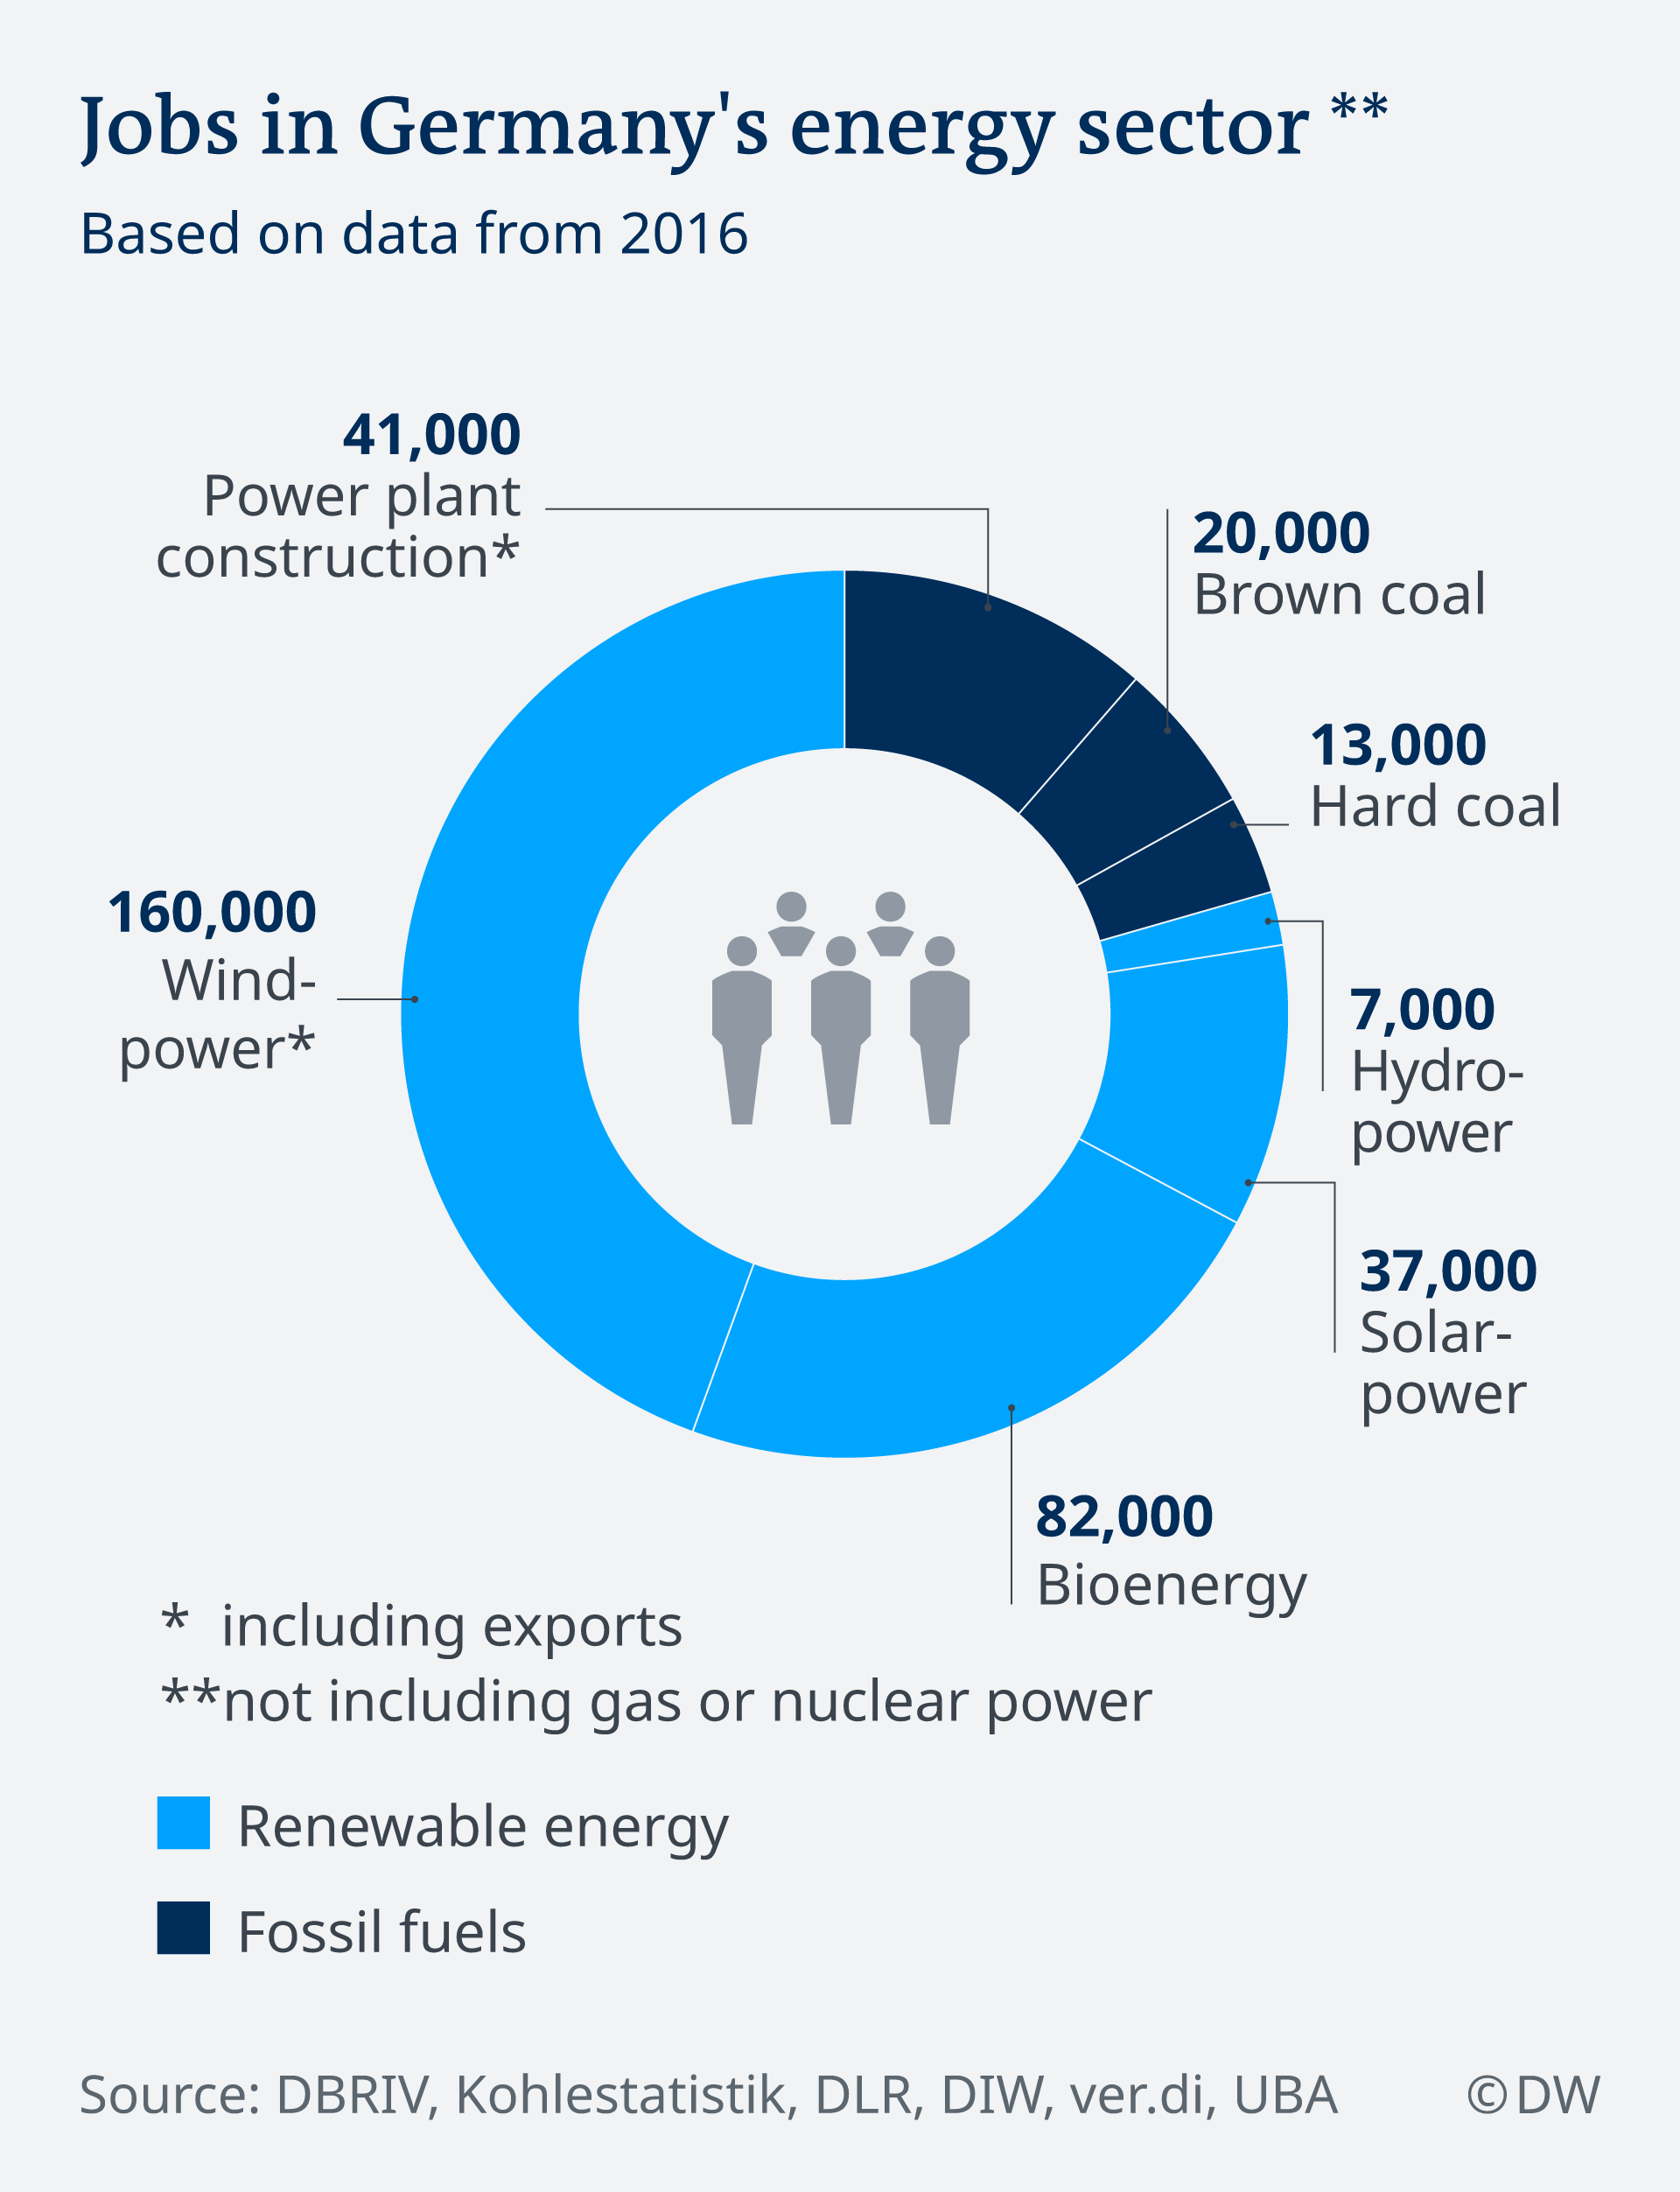 An infographic showing the number of jobs in Germany's energy sector according to energy type. Wind power is the highest, employing 160,000 people, while hydropower is the lowest at 7,000. Brown coal and hard coal employs 20,000 and 13,000 people, respectively. 